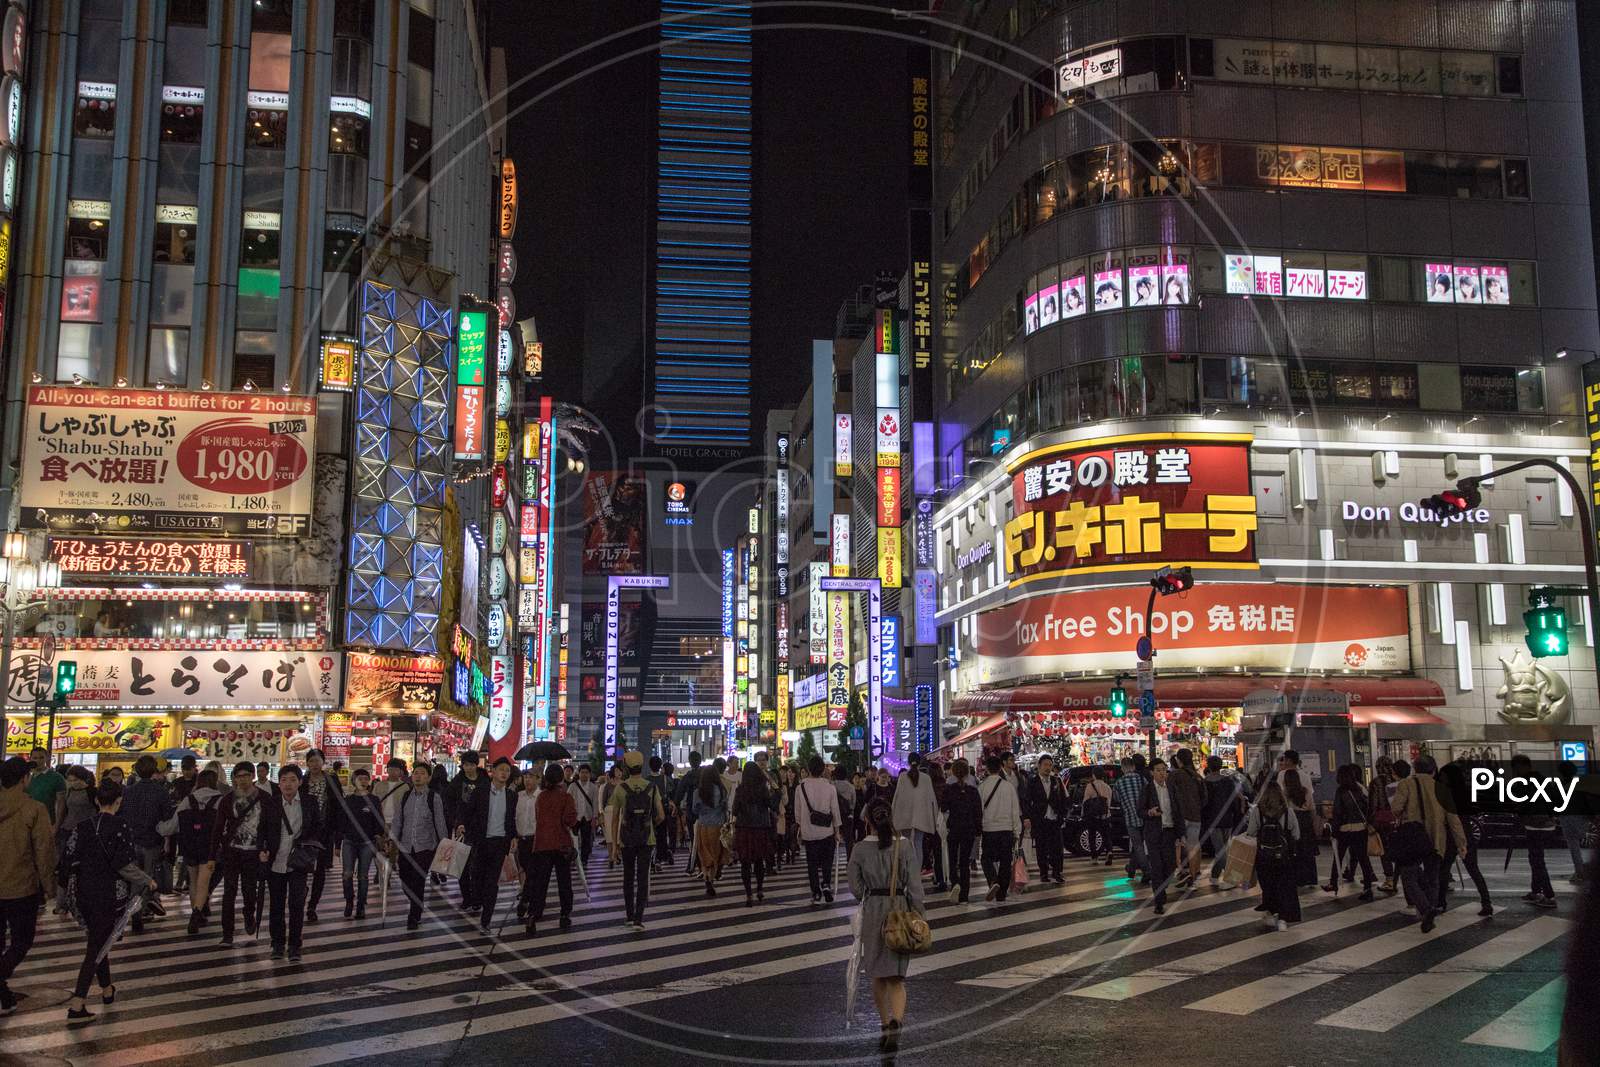 TOKYO/JAPAN - 30th July, 2019 : Shibuya Scramble is known for its busiest crossroads in the world and is the leader of most people’s must-see list in Tokyo.